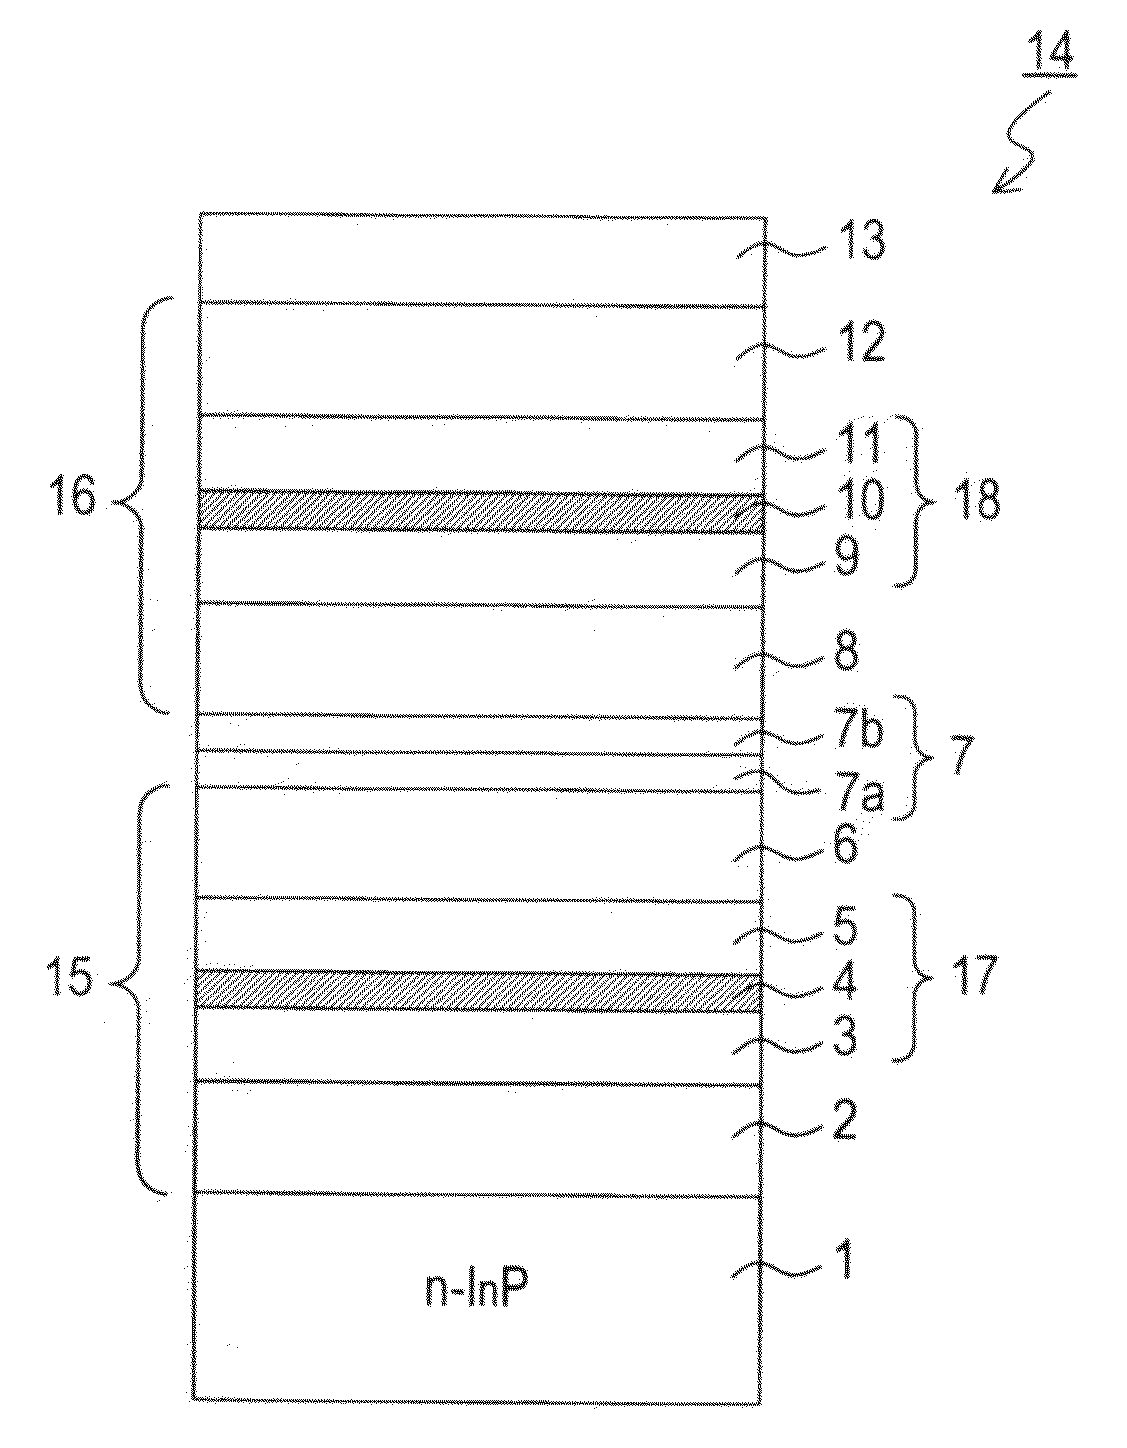 Semiconductor laser structure